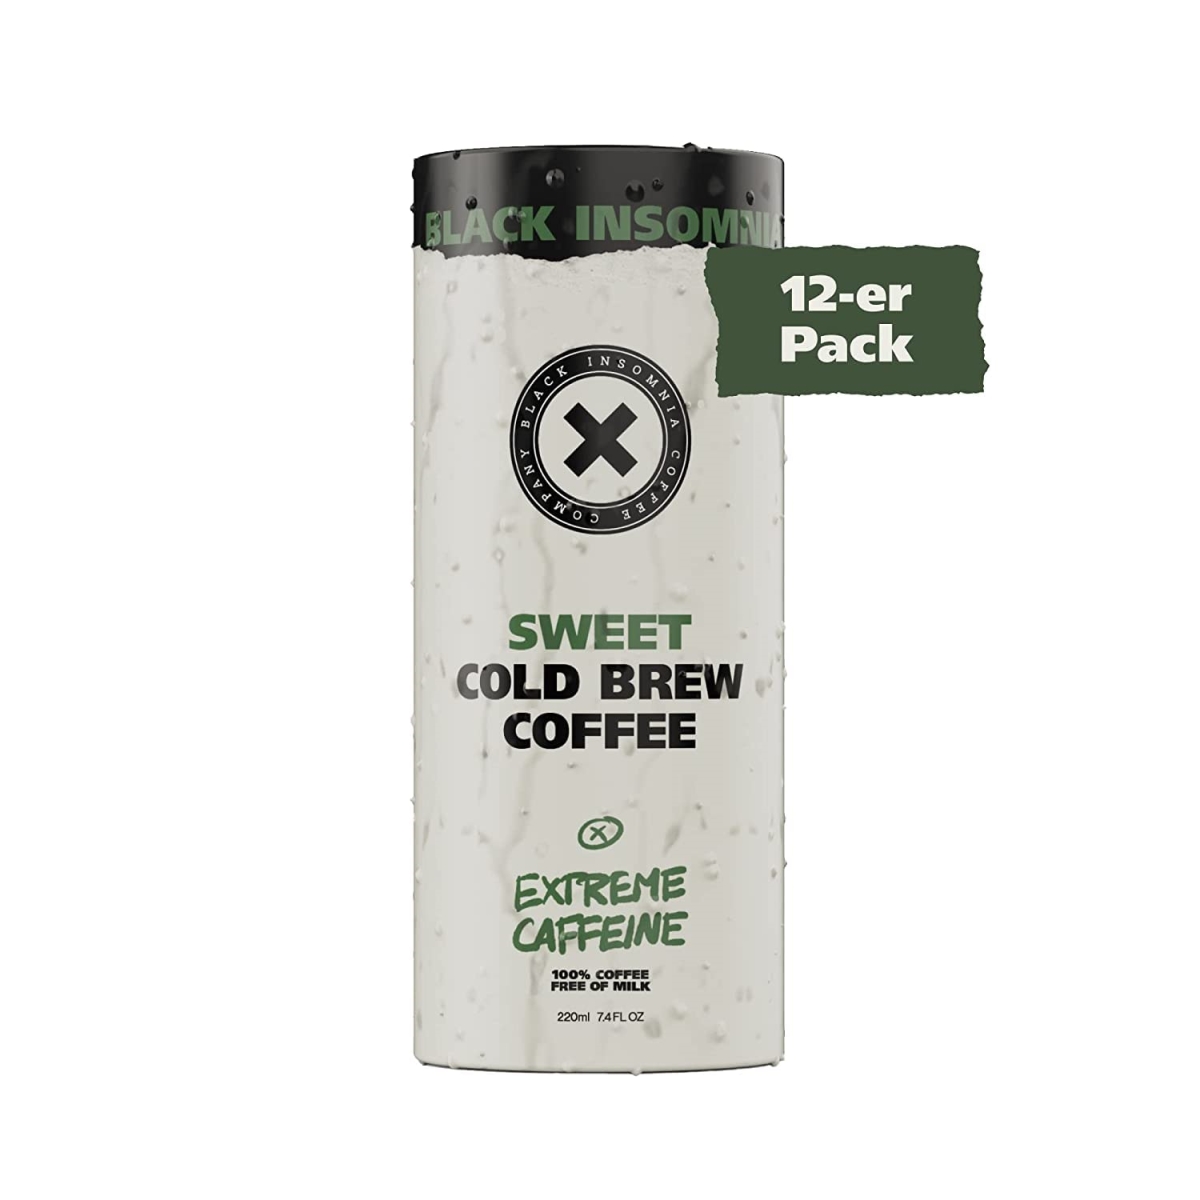 Picture of Black Insomnia BICCOldBrew-Sweet Extreme Caffeine Sweet Cold Brew Coffee - 12 Count